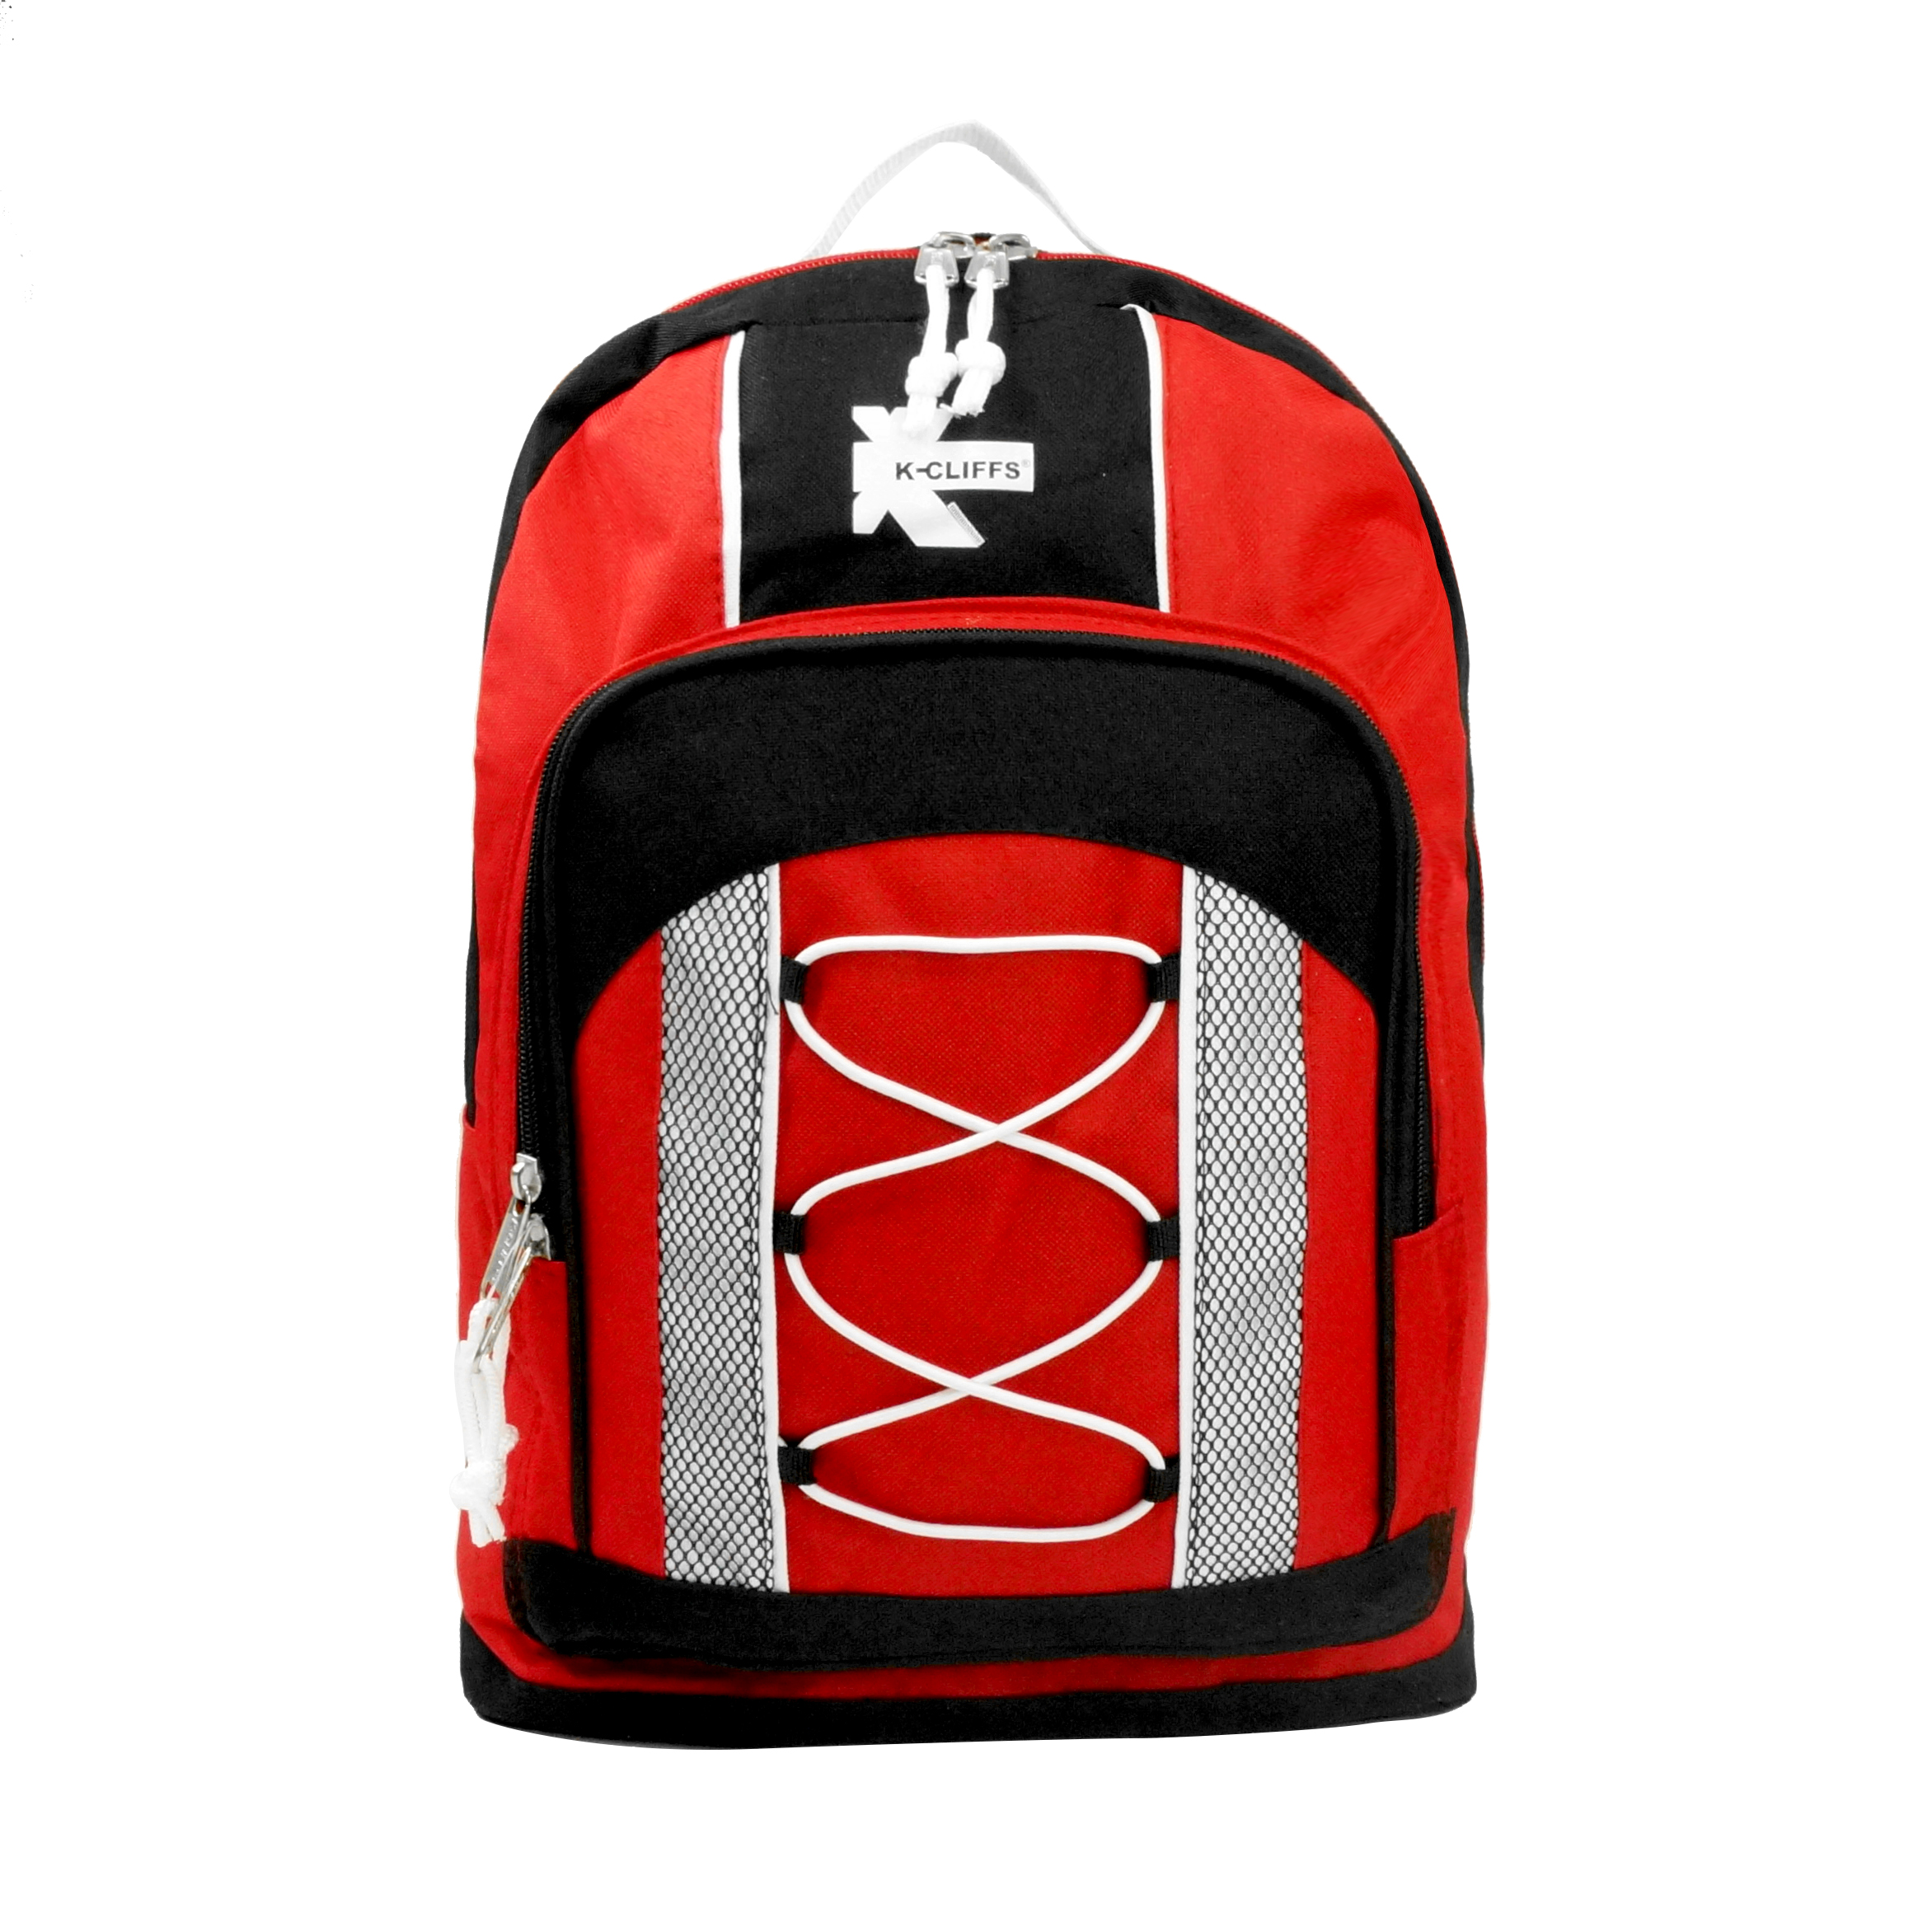 K-Cliffs 15” Lightweight School Backpack Daypack Bungee Bookbag Travel Unisex Kids- Adults Red, Polyester - image 1 of 6